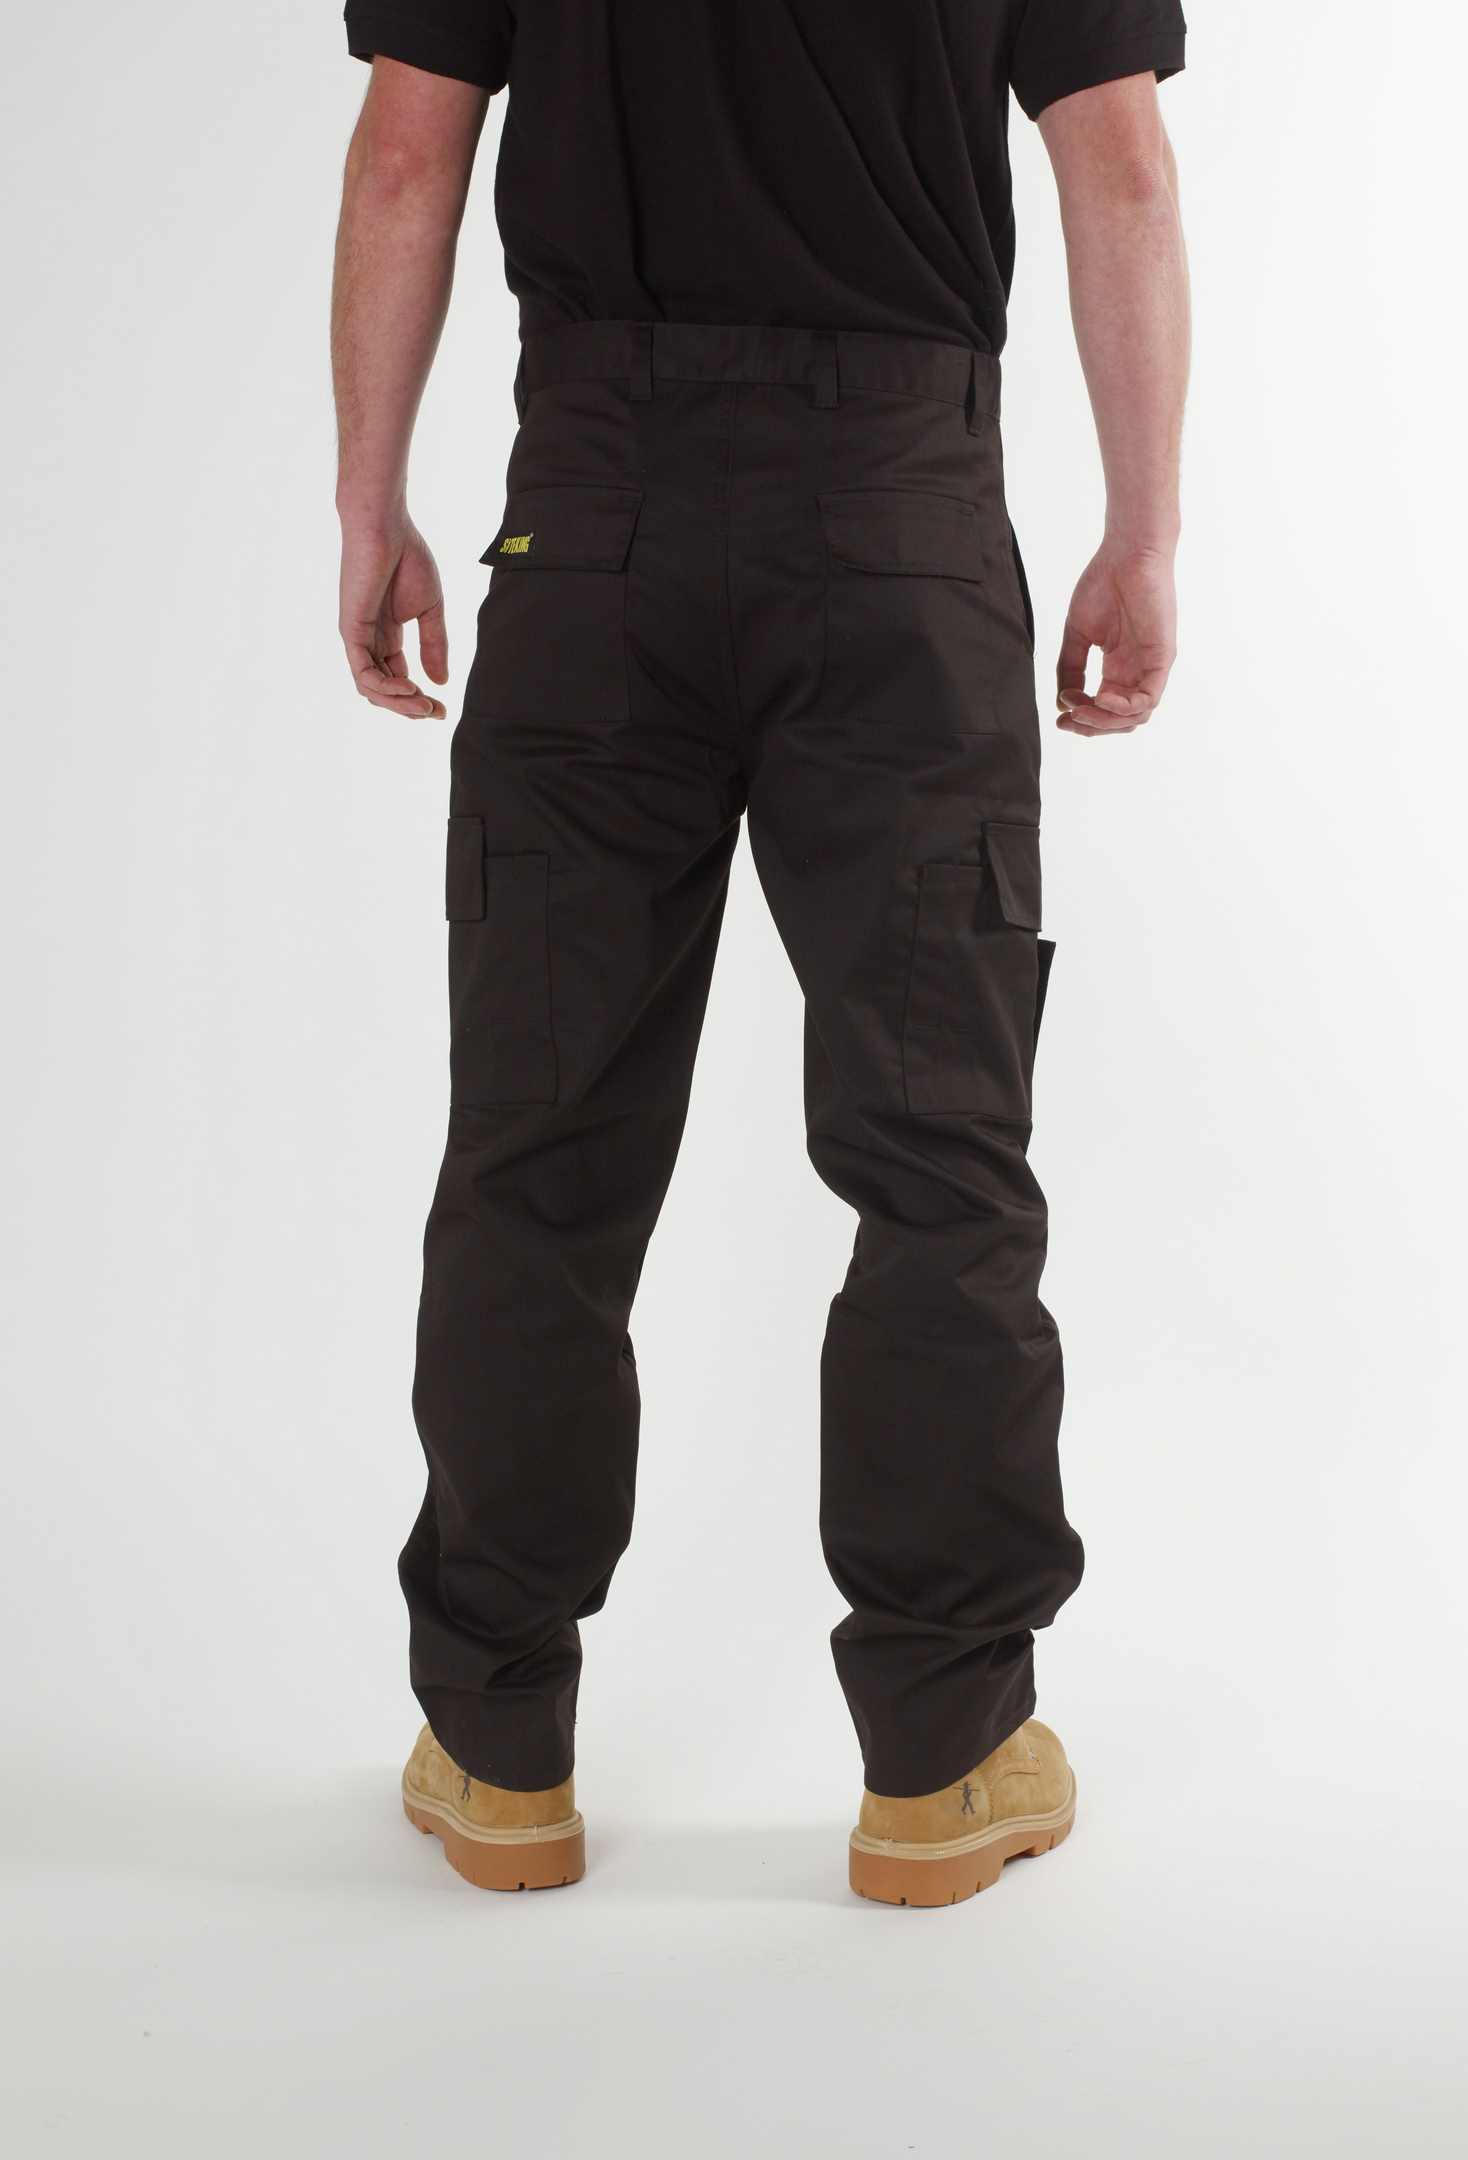 SITE KING Mens Cargo Combat Work Trousers Sizes 28 to 56 with Button & Zip Fly